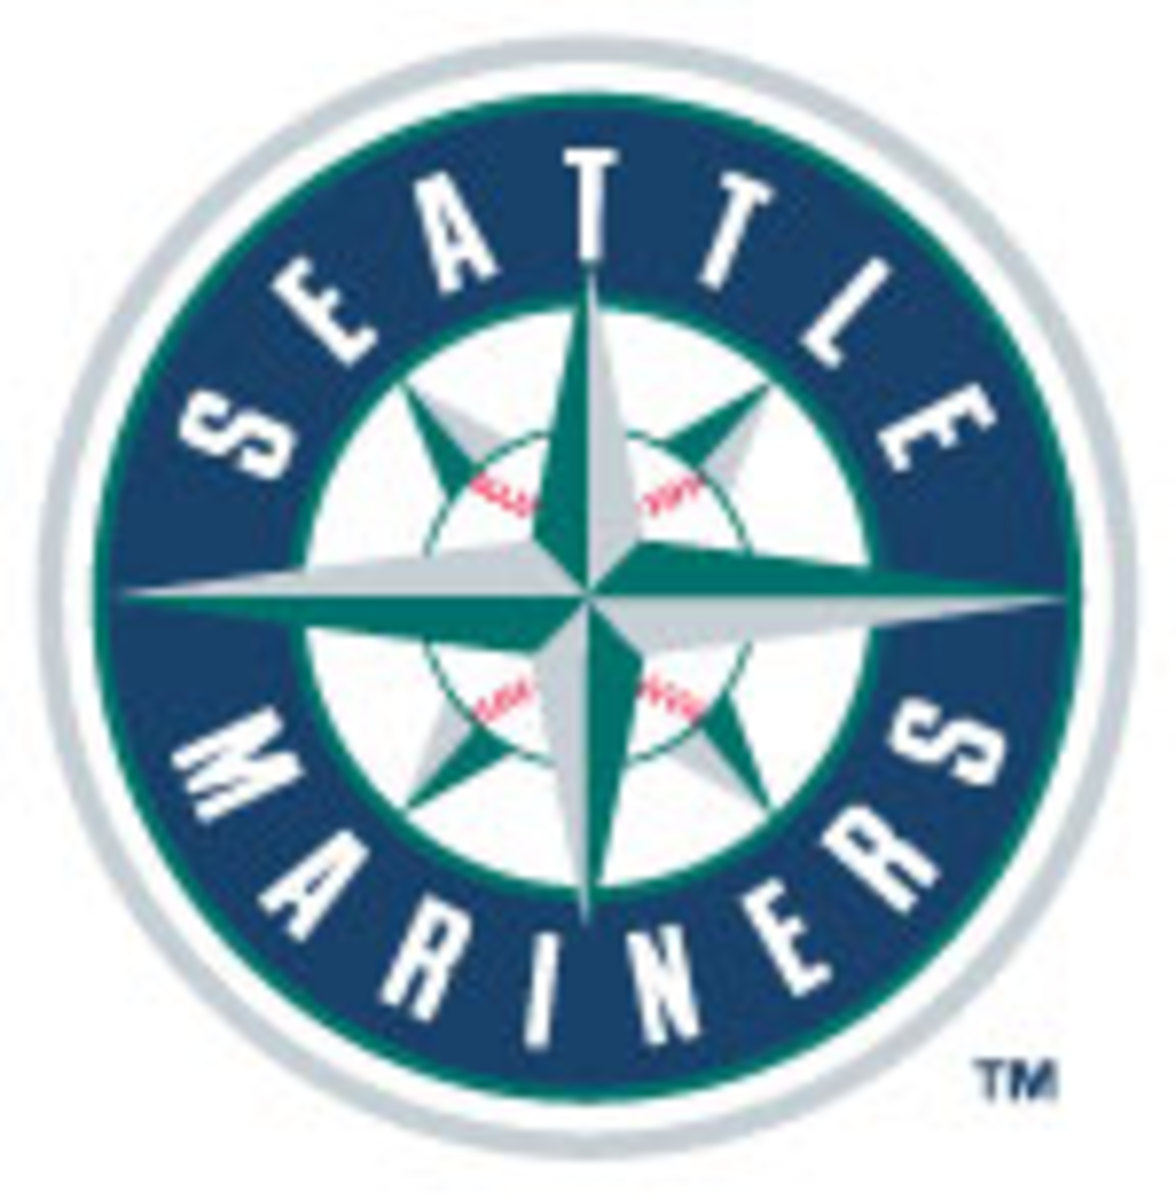 Seattle Mariners 2022: Scouting, Projected Lineup, Season